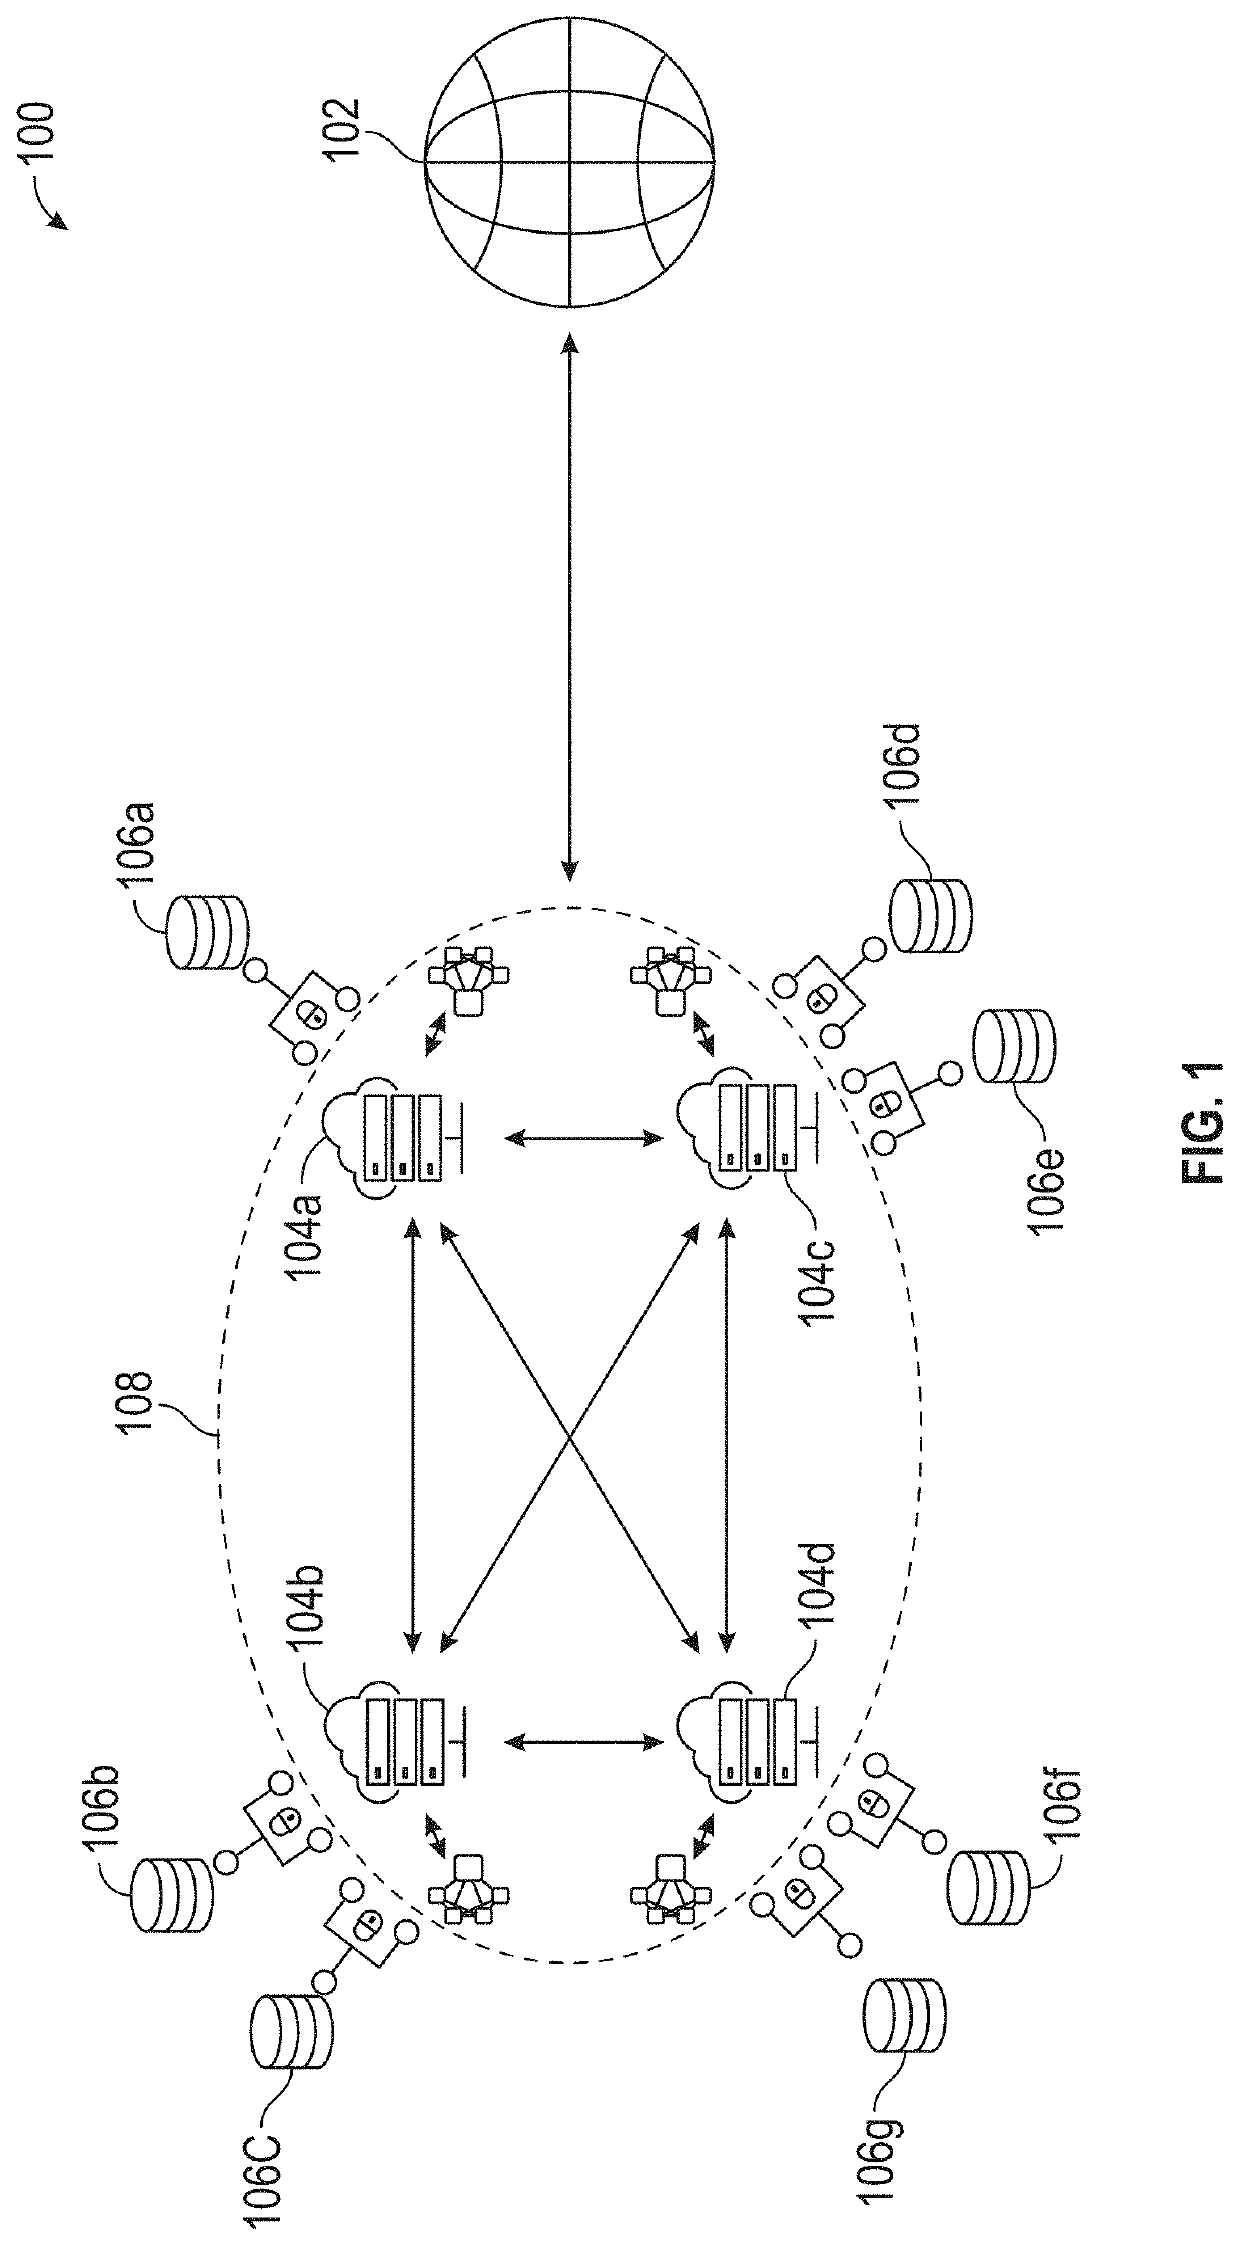 Systems and methods for secure data  aggregation and computation